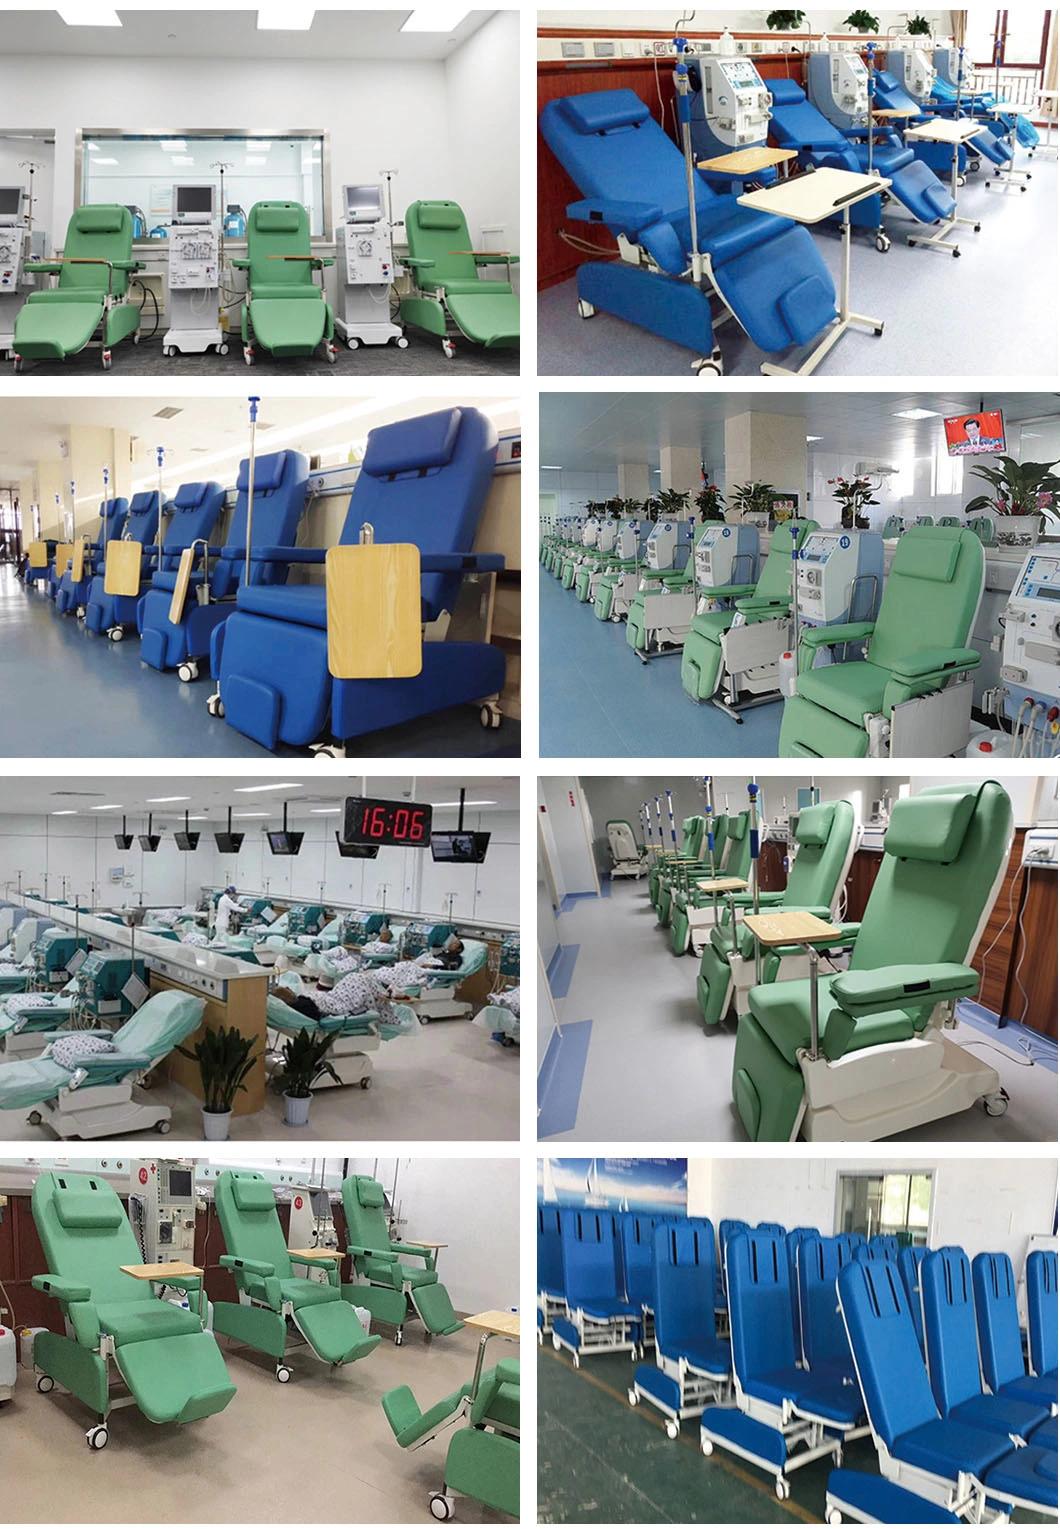 Hospital Chemotherapy Infusion Phlebotomy Donation Collection Mobile Electric Blood Hemodialysis Dialysis Chair